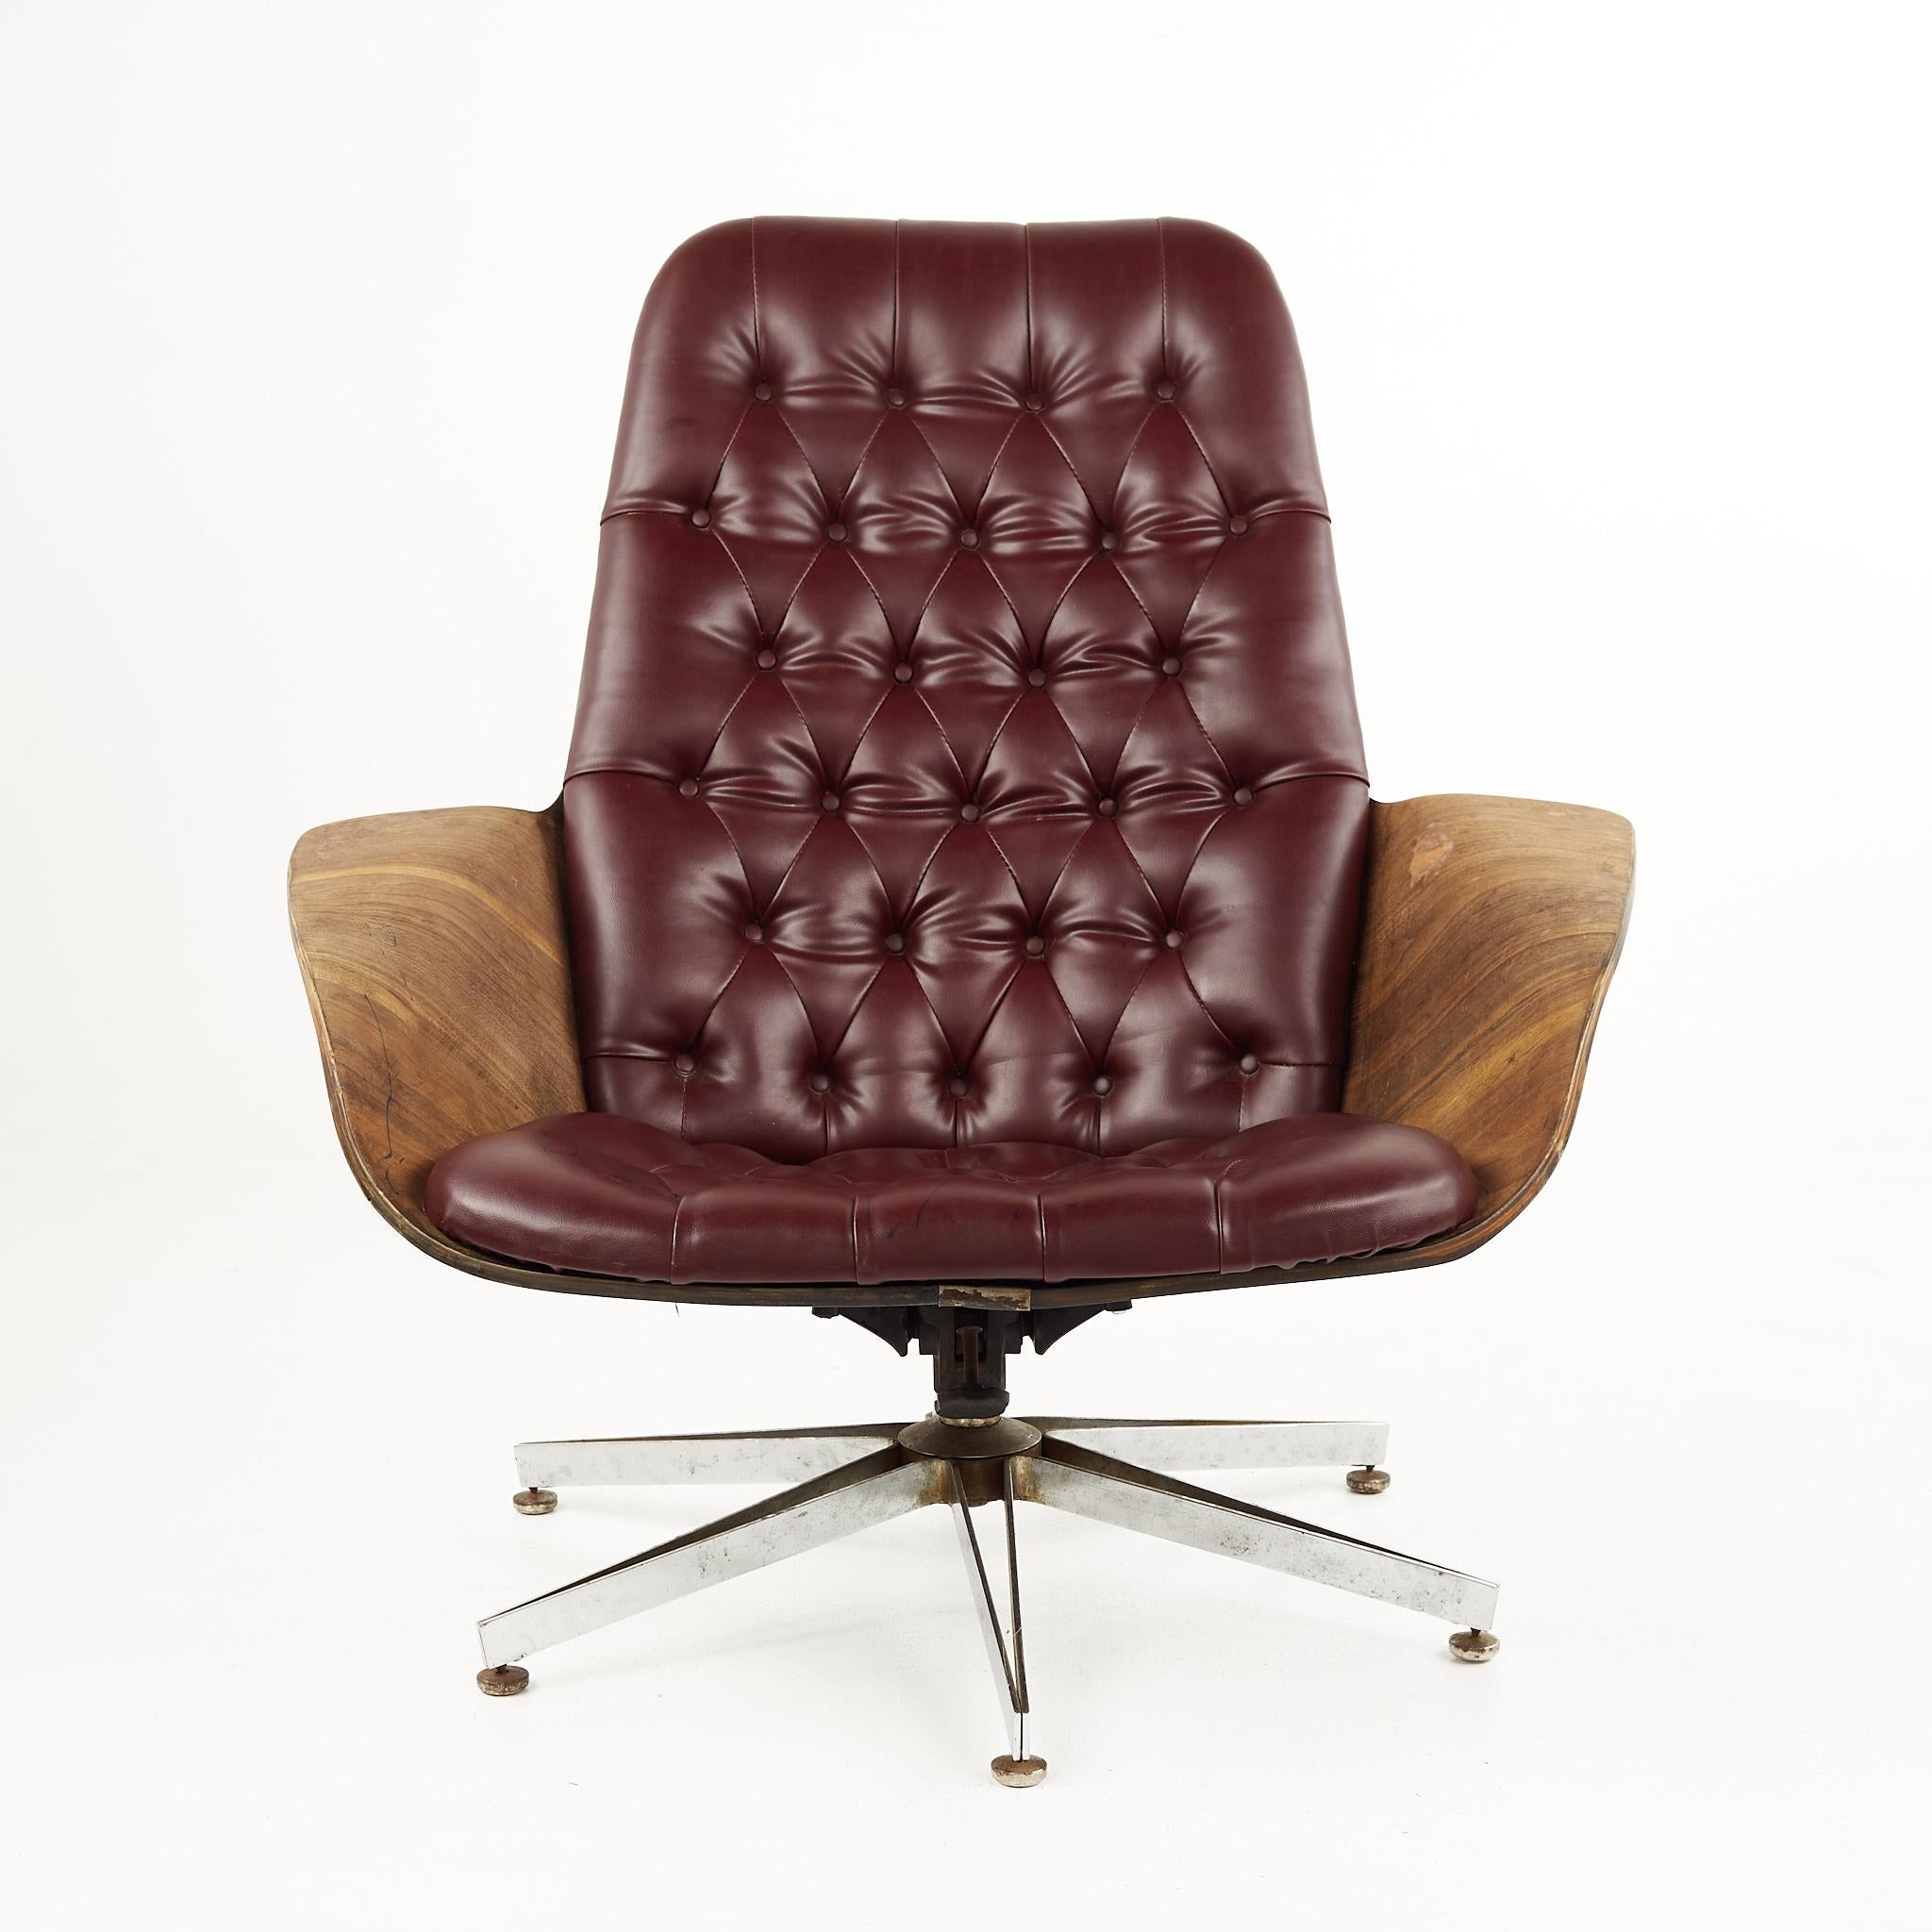 George Mulhauser for Plycraft Mid Century Tufted walnut lounge chair.

The lounge chair measures: 35.5 wide x 35 deep x 36.5 high, with a seat height of 13.5 inches and an arm height/chair clearance of 19.75 inches.

All pieces of furniture can